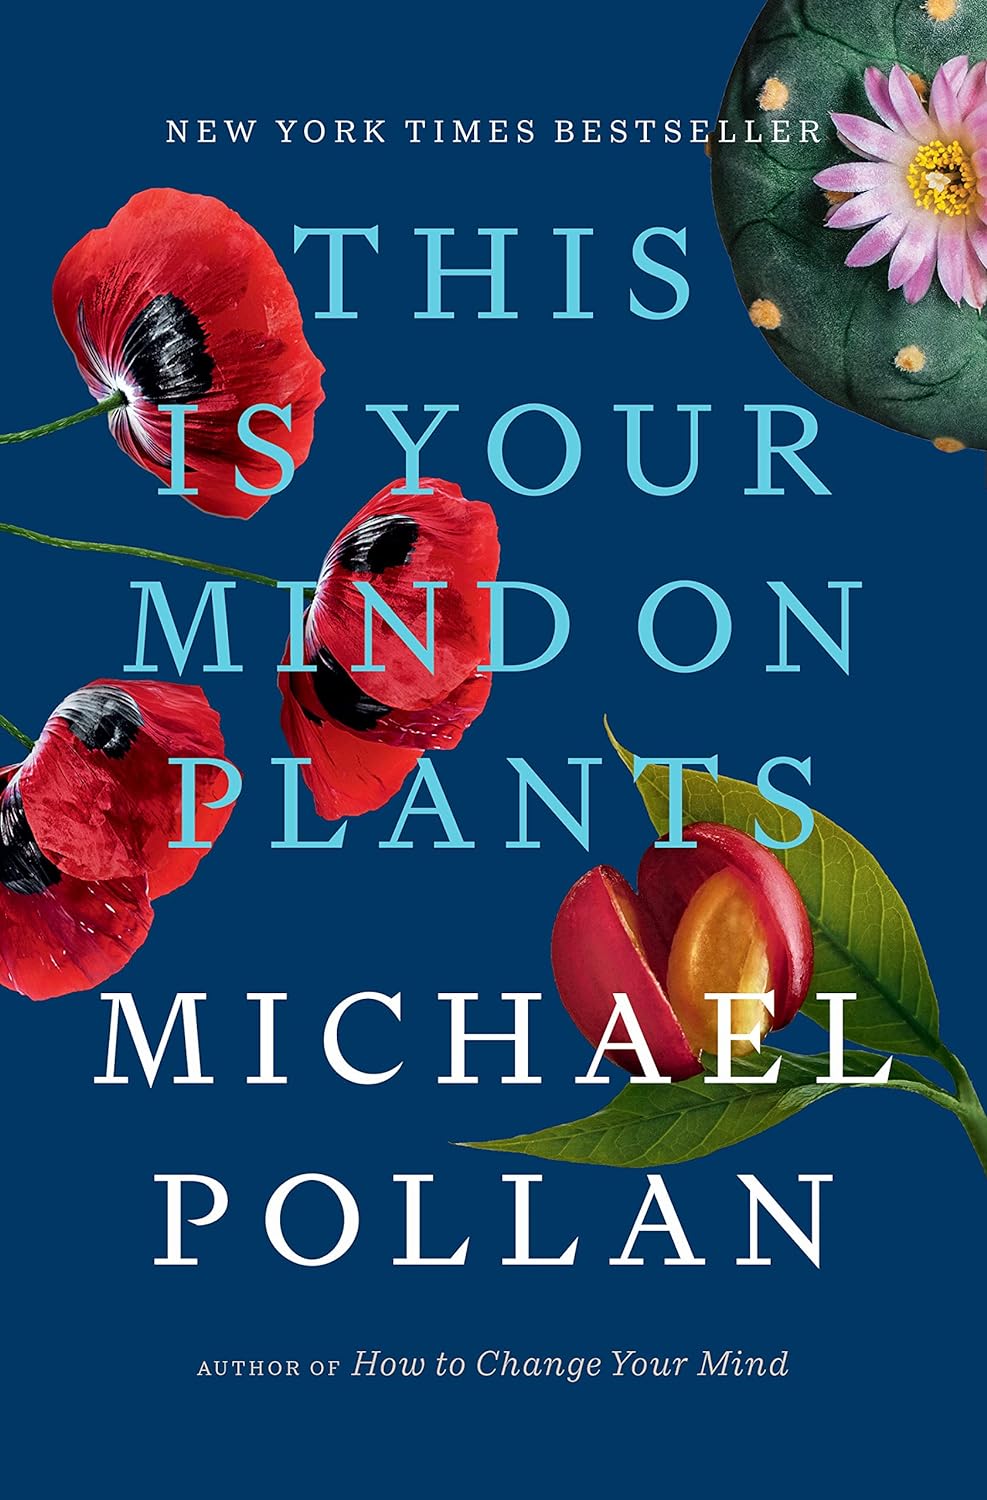 This Is Your Mind on Plants (Hardcover, 2020, Allen Lane)